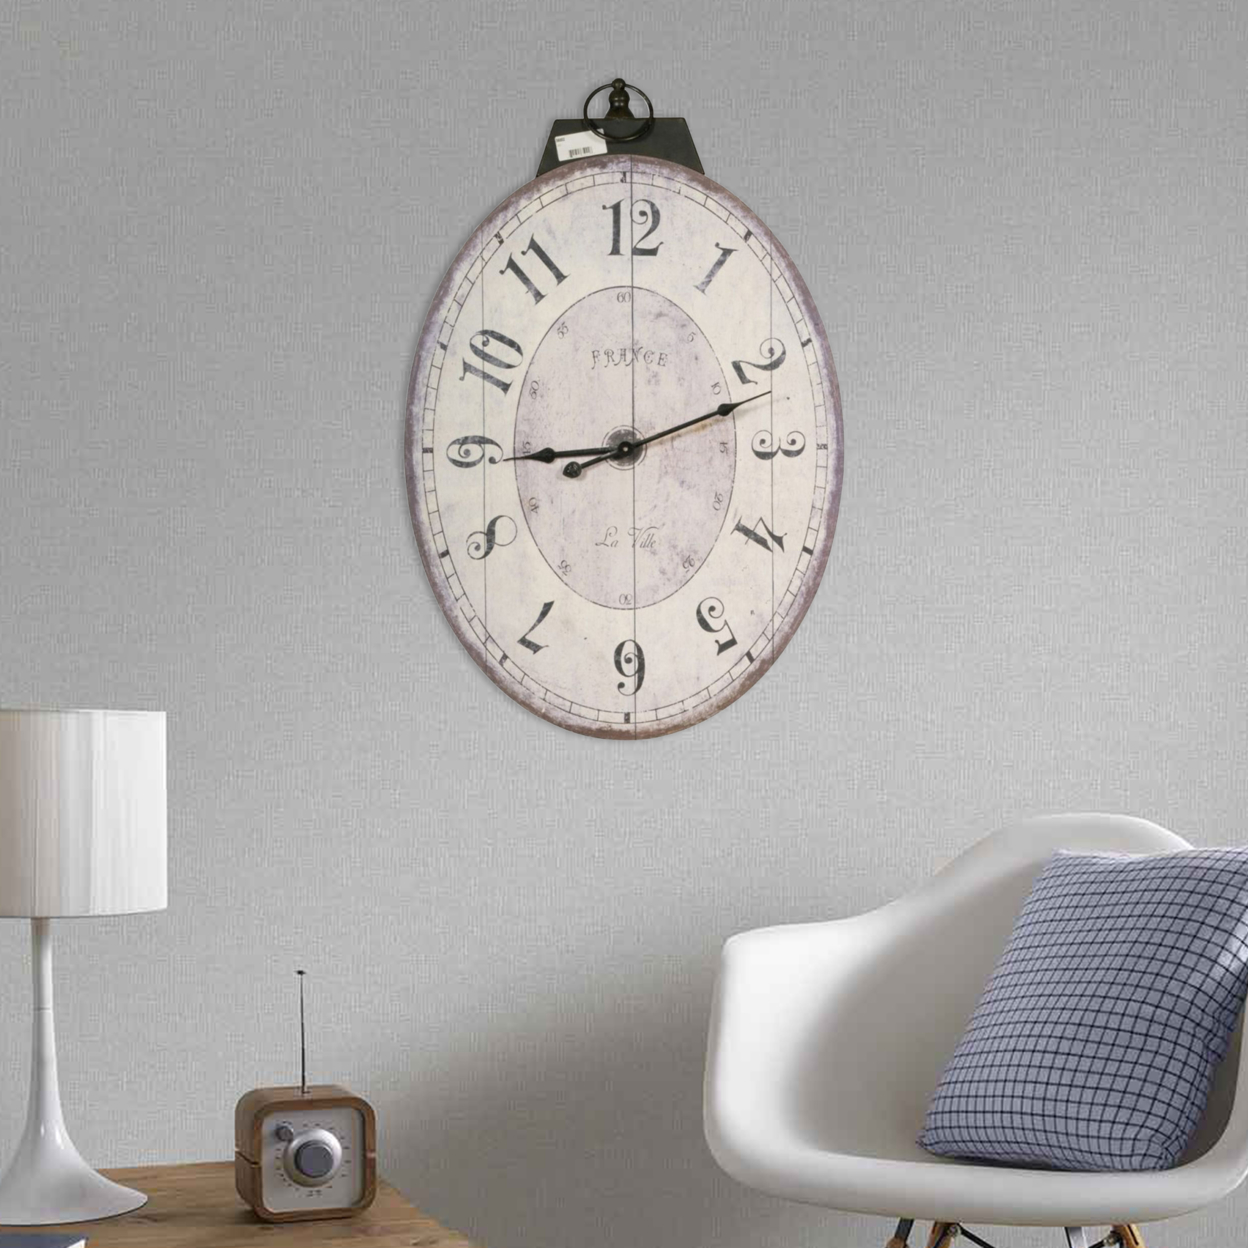 Distressed Oval Shape Wooden Wall Clock With Ring Hanger, White And Black- Saltoro Sherpi